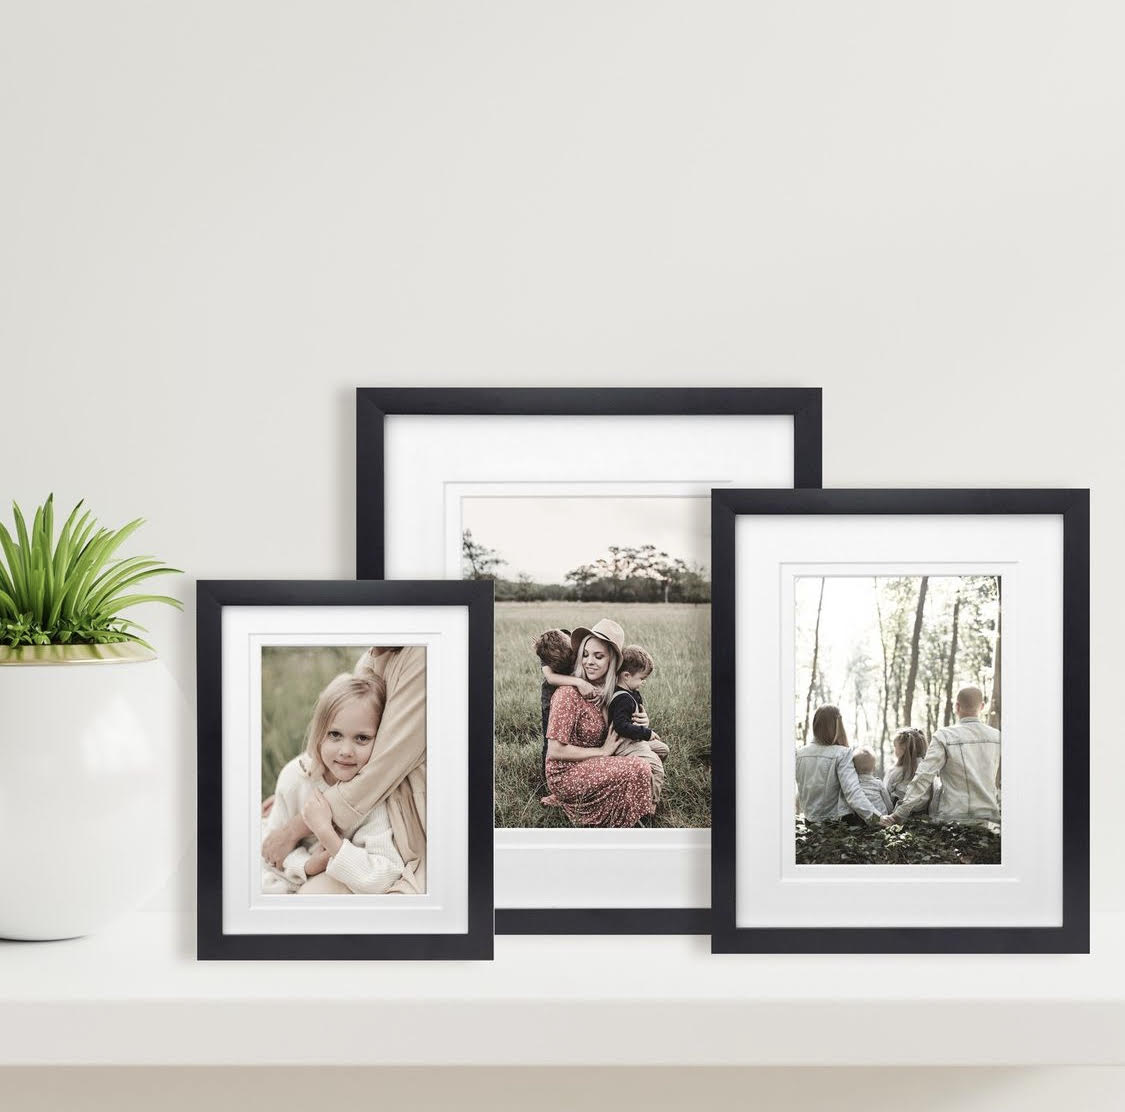 12x16” black timber frame with matboard to suit 8x12” photo